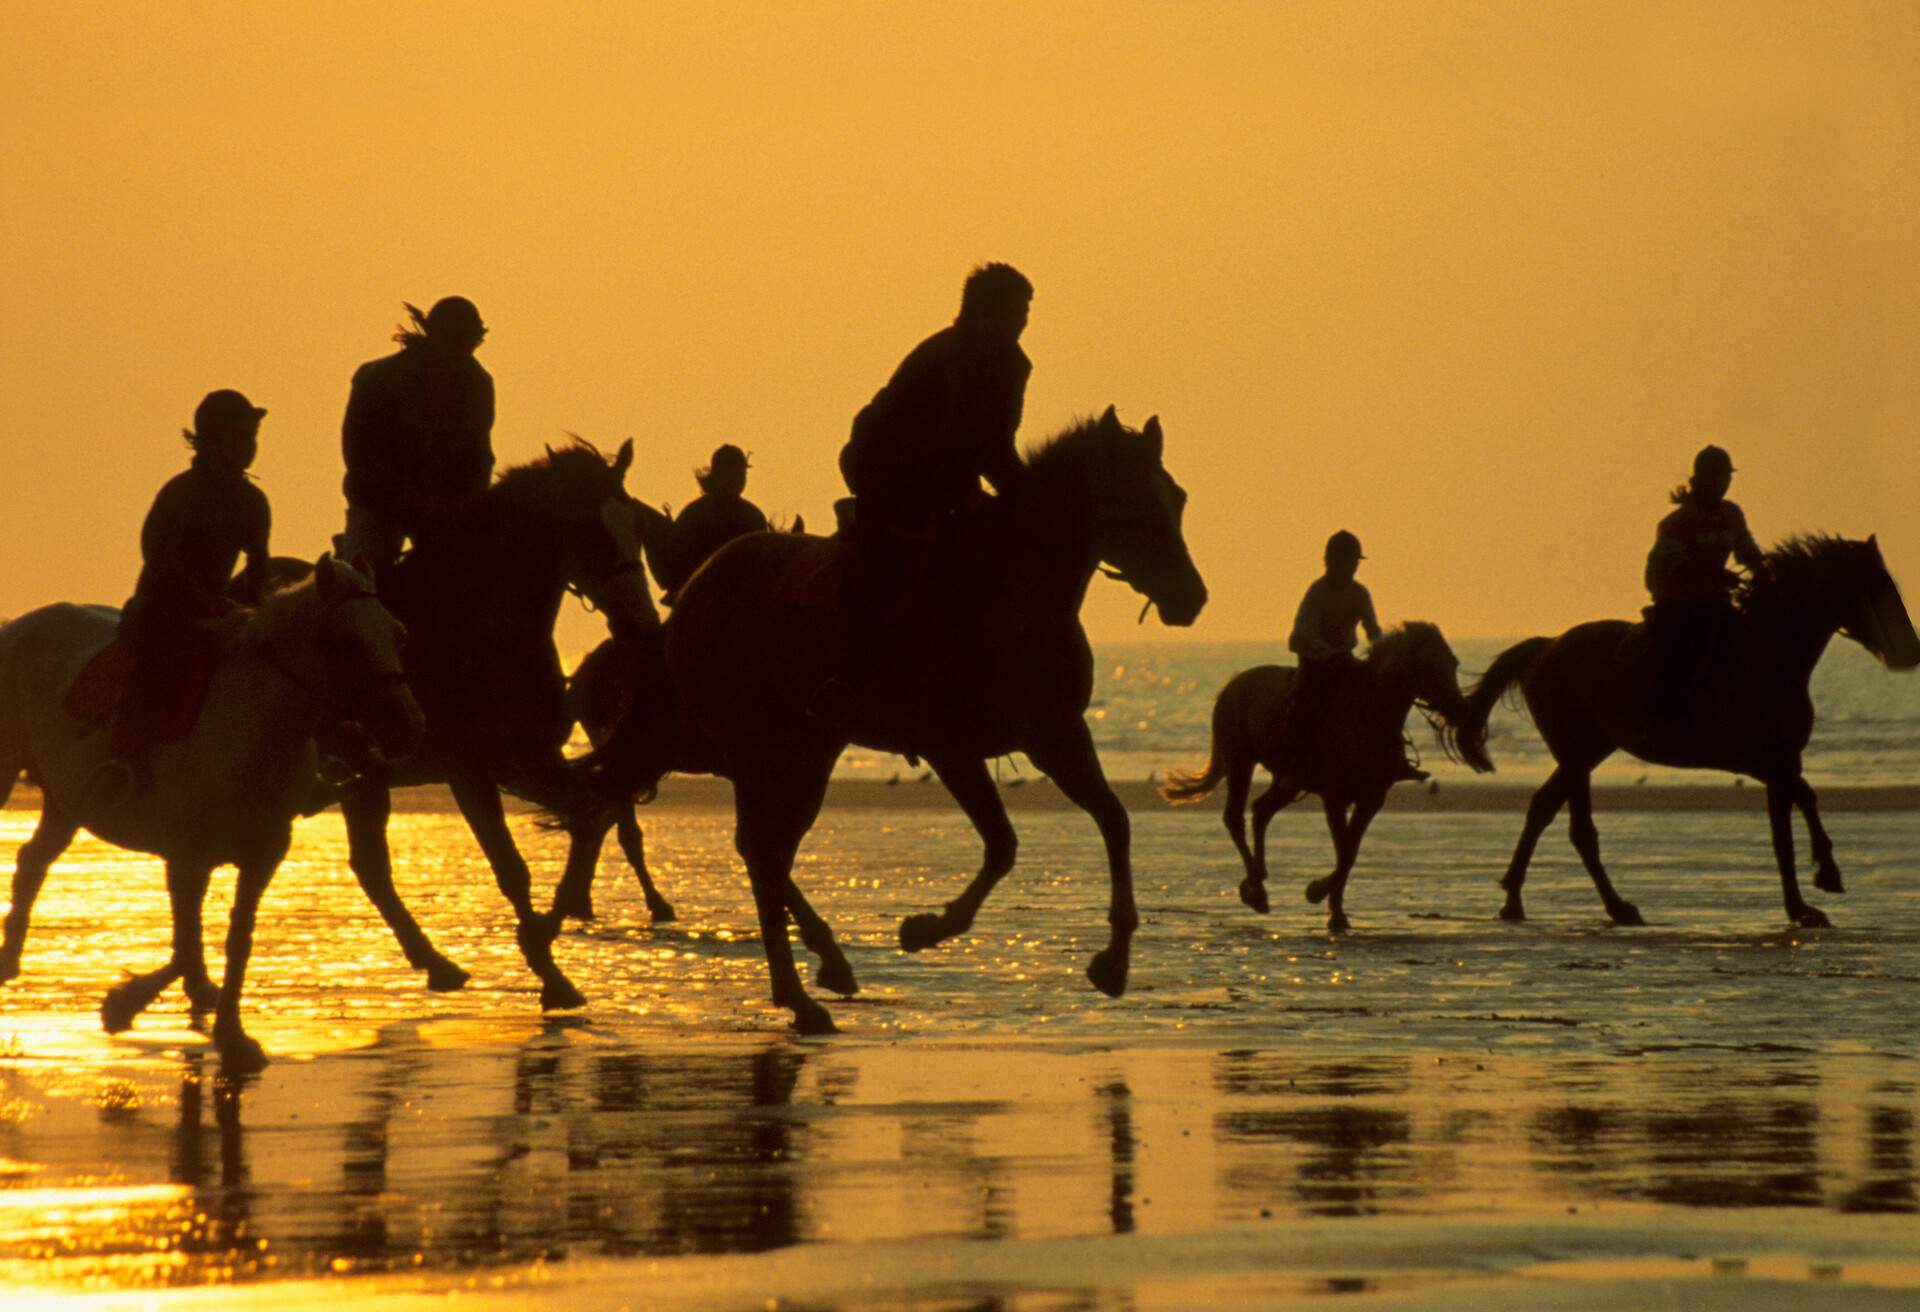 FRANCE_DEAUVILLE-BEACH_THEME_HORSES_RIDING_PEOPLE-GettyImages-549820955